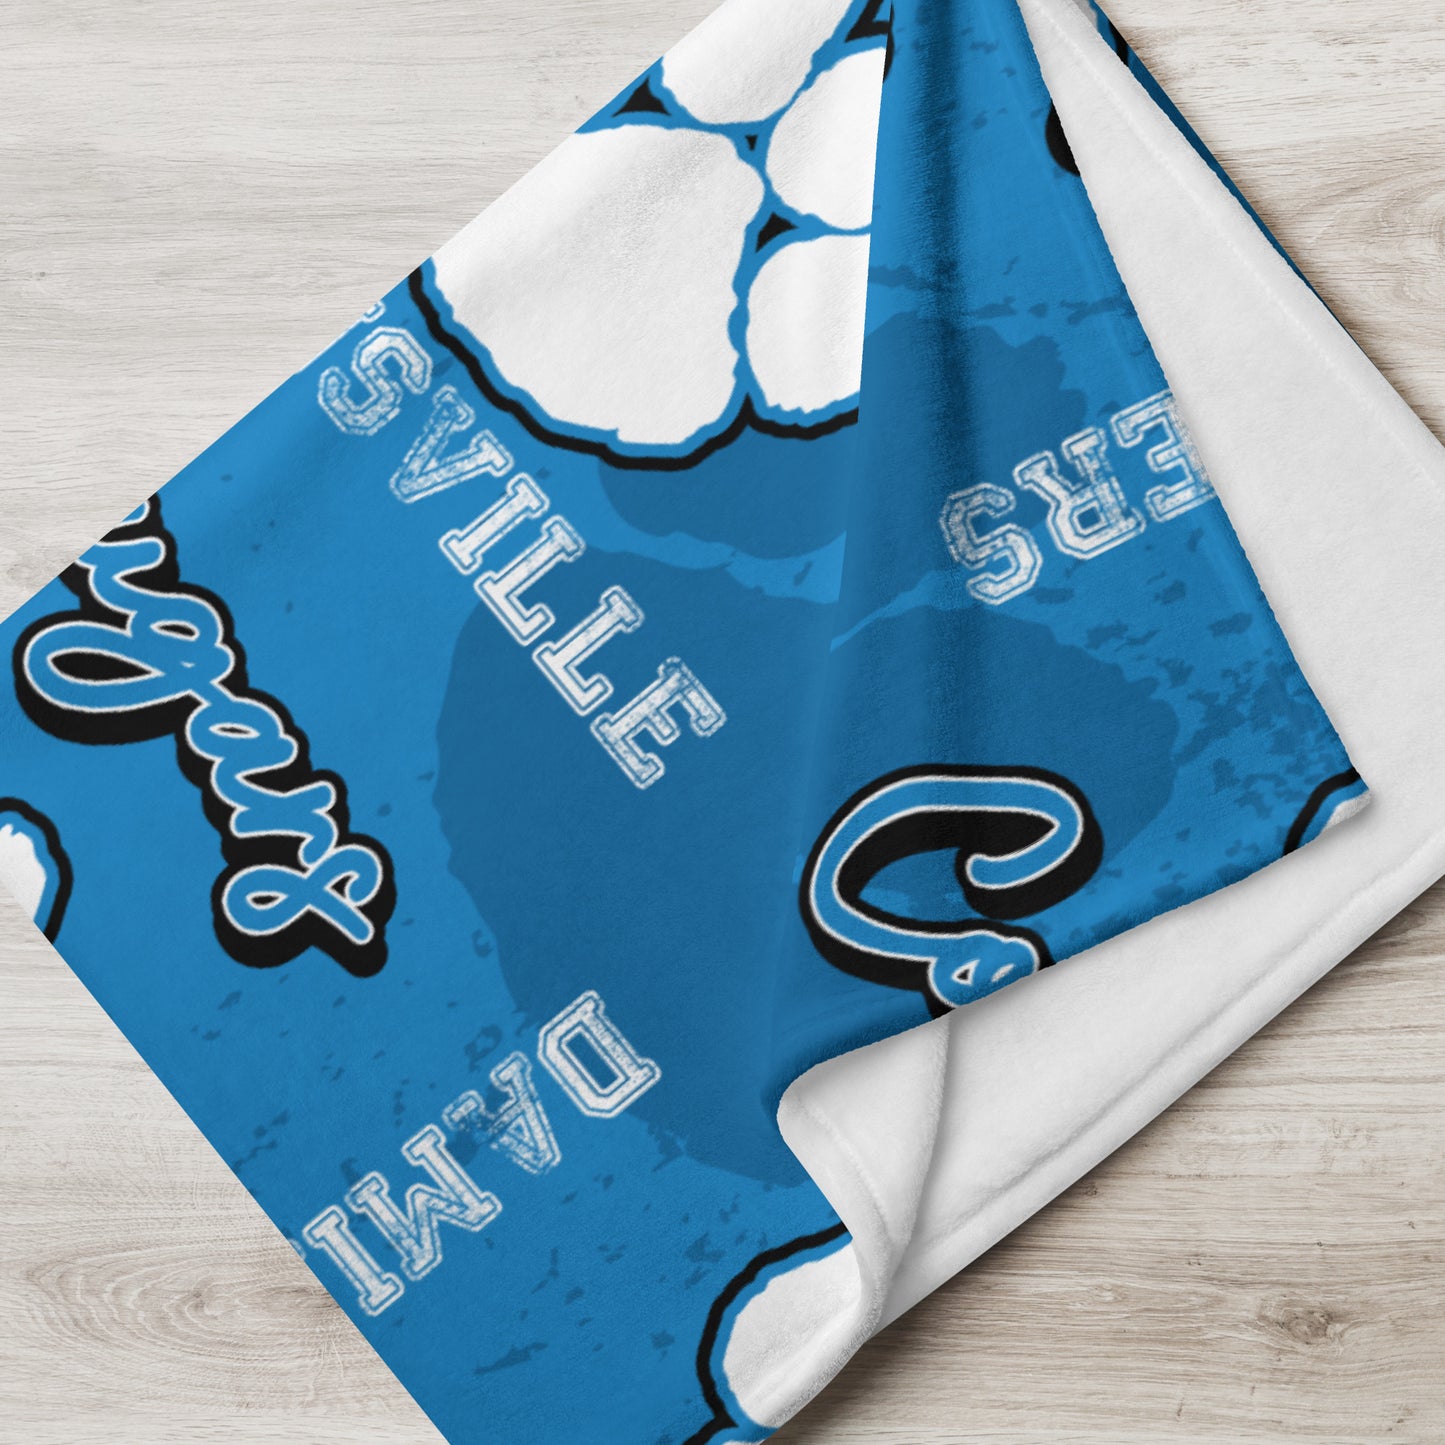 Albers/Damiansville Cougars Throw Blanket